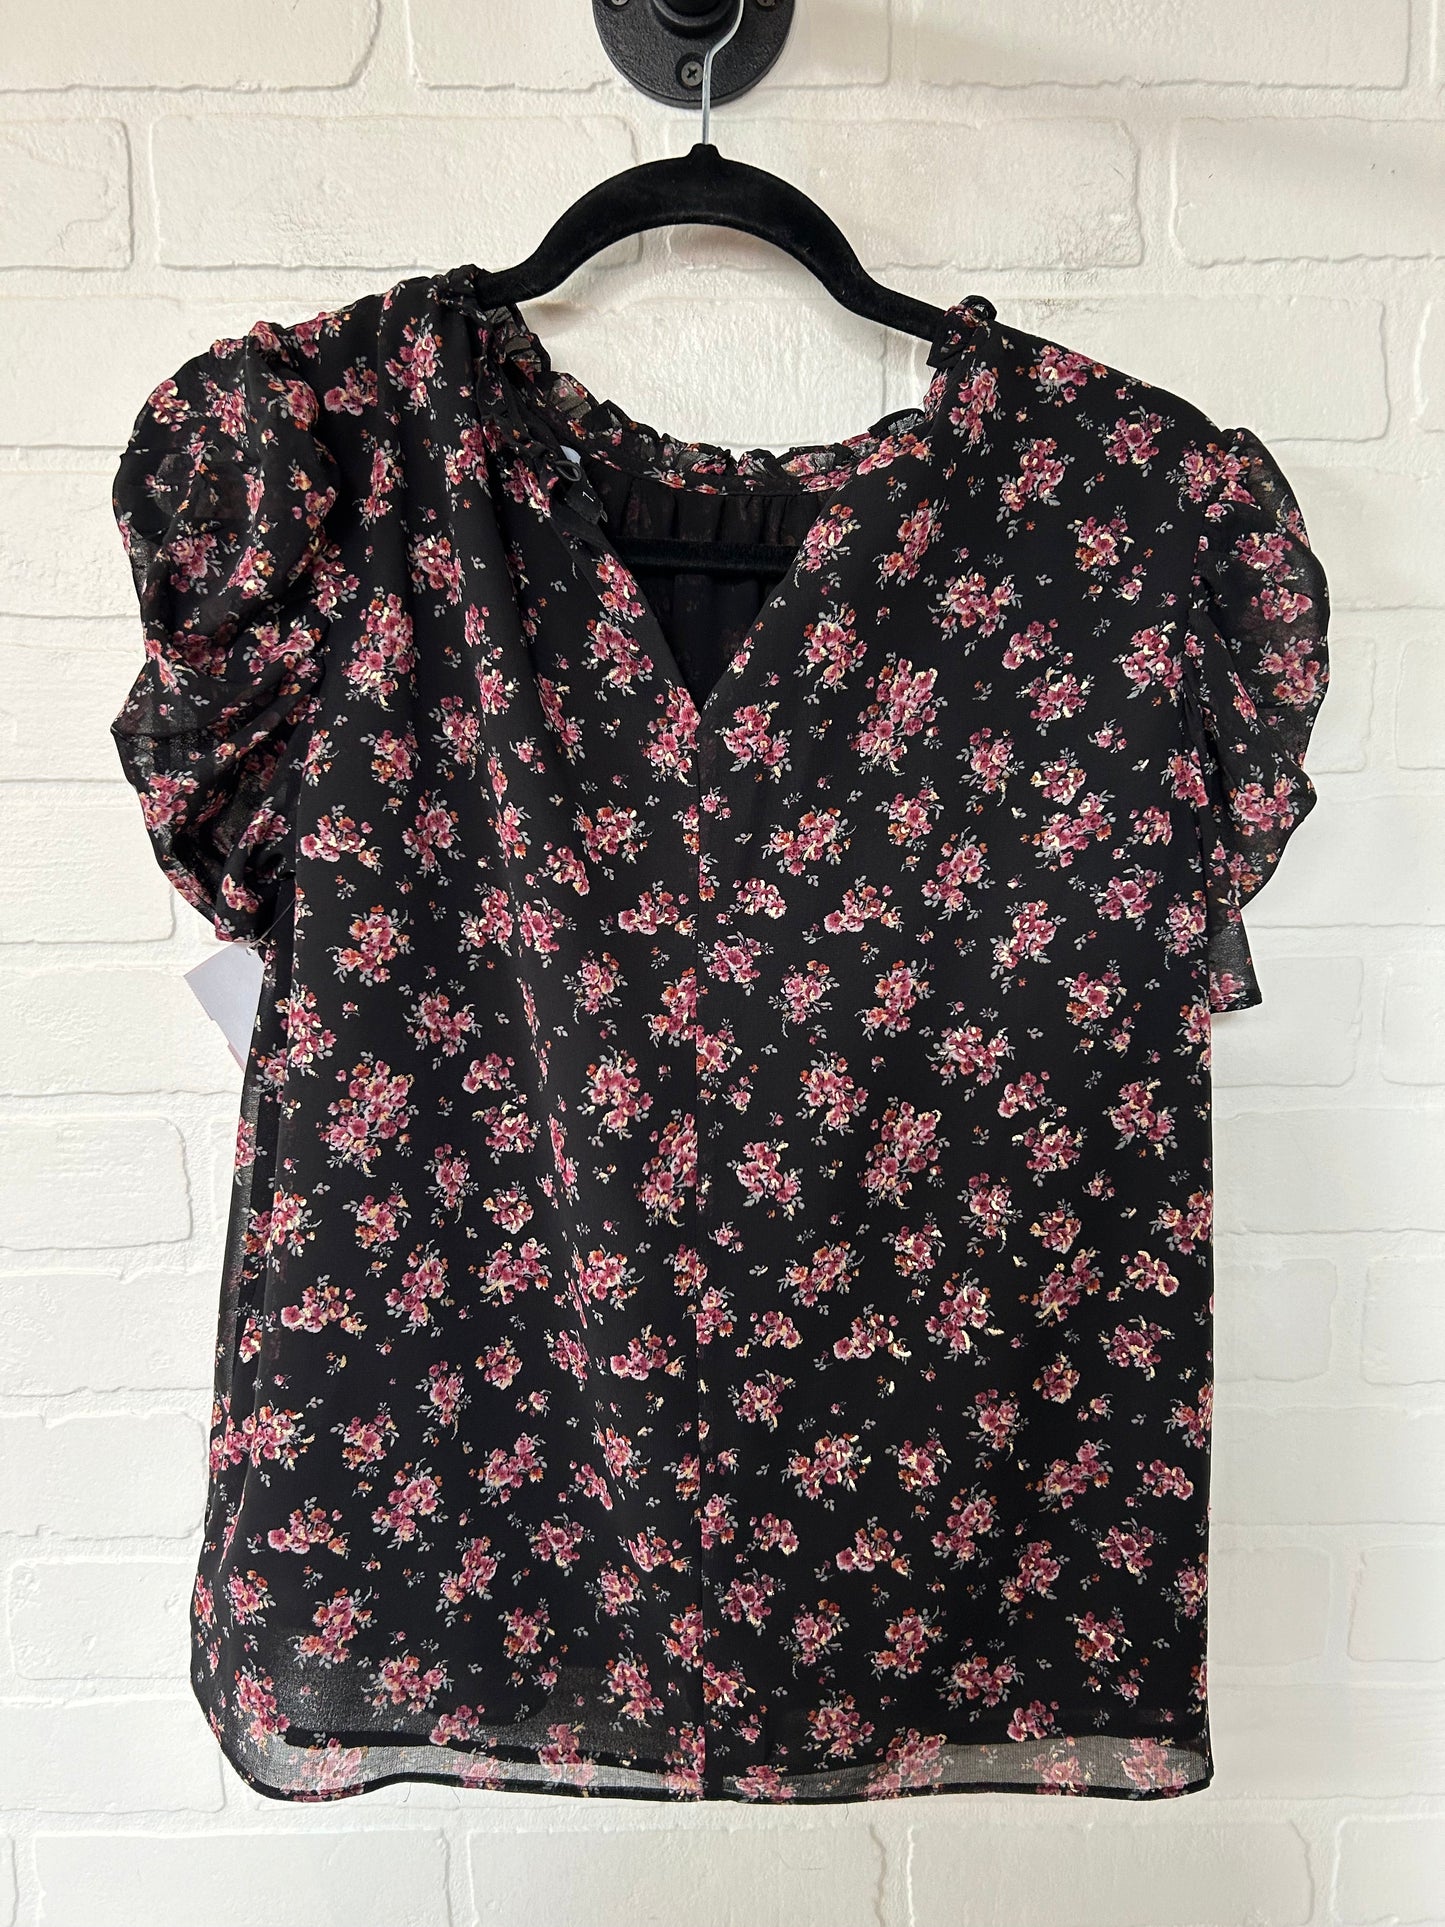 Floral Print Top Short Sleeve 1.state, Size M